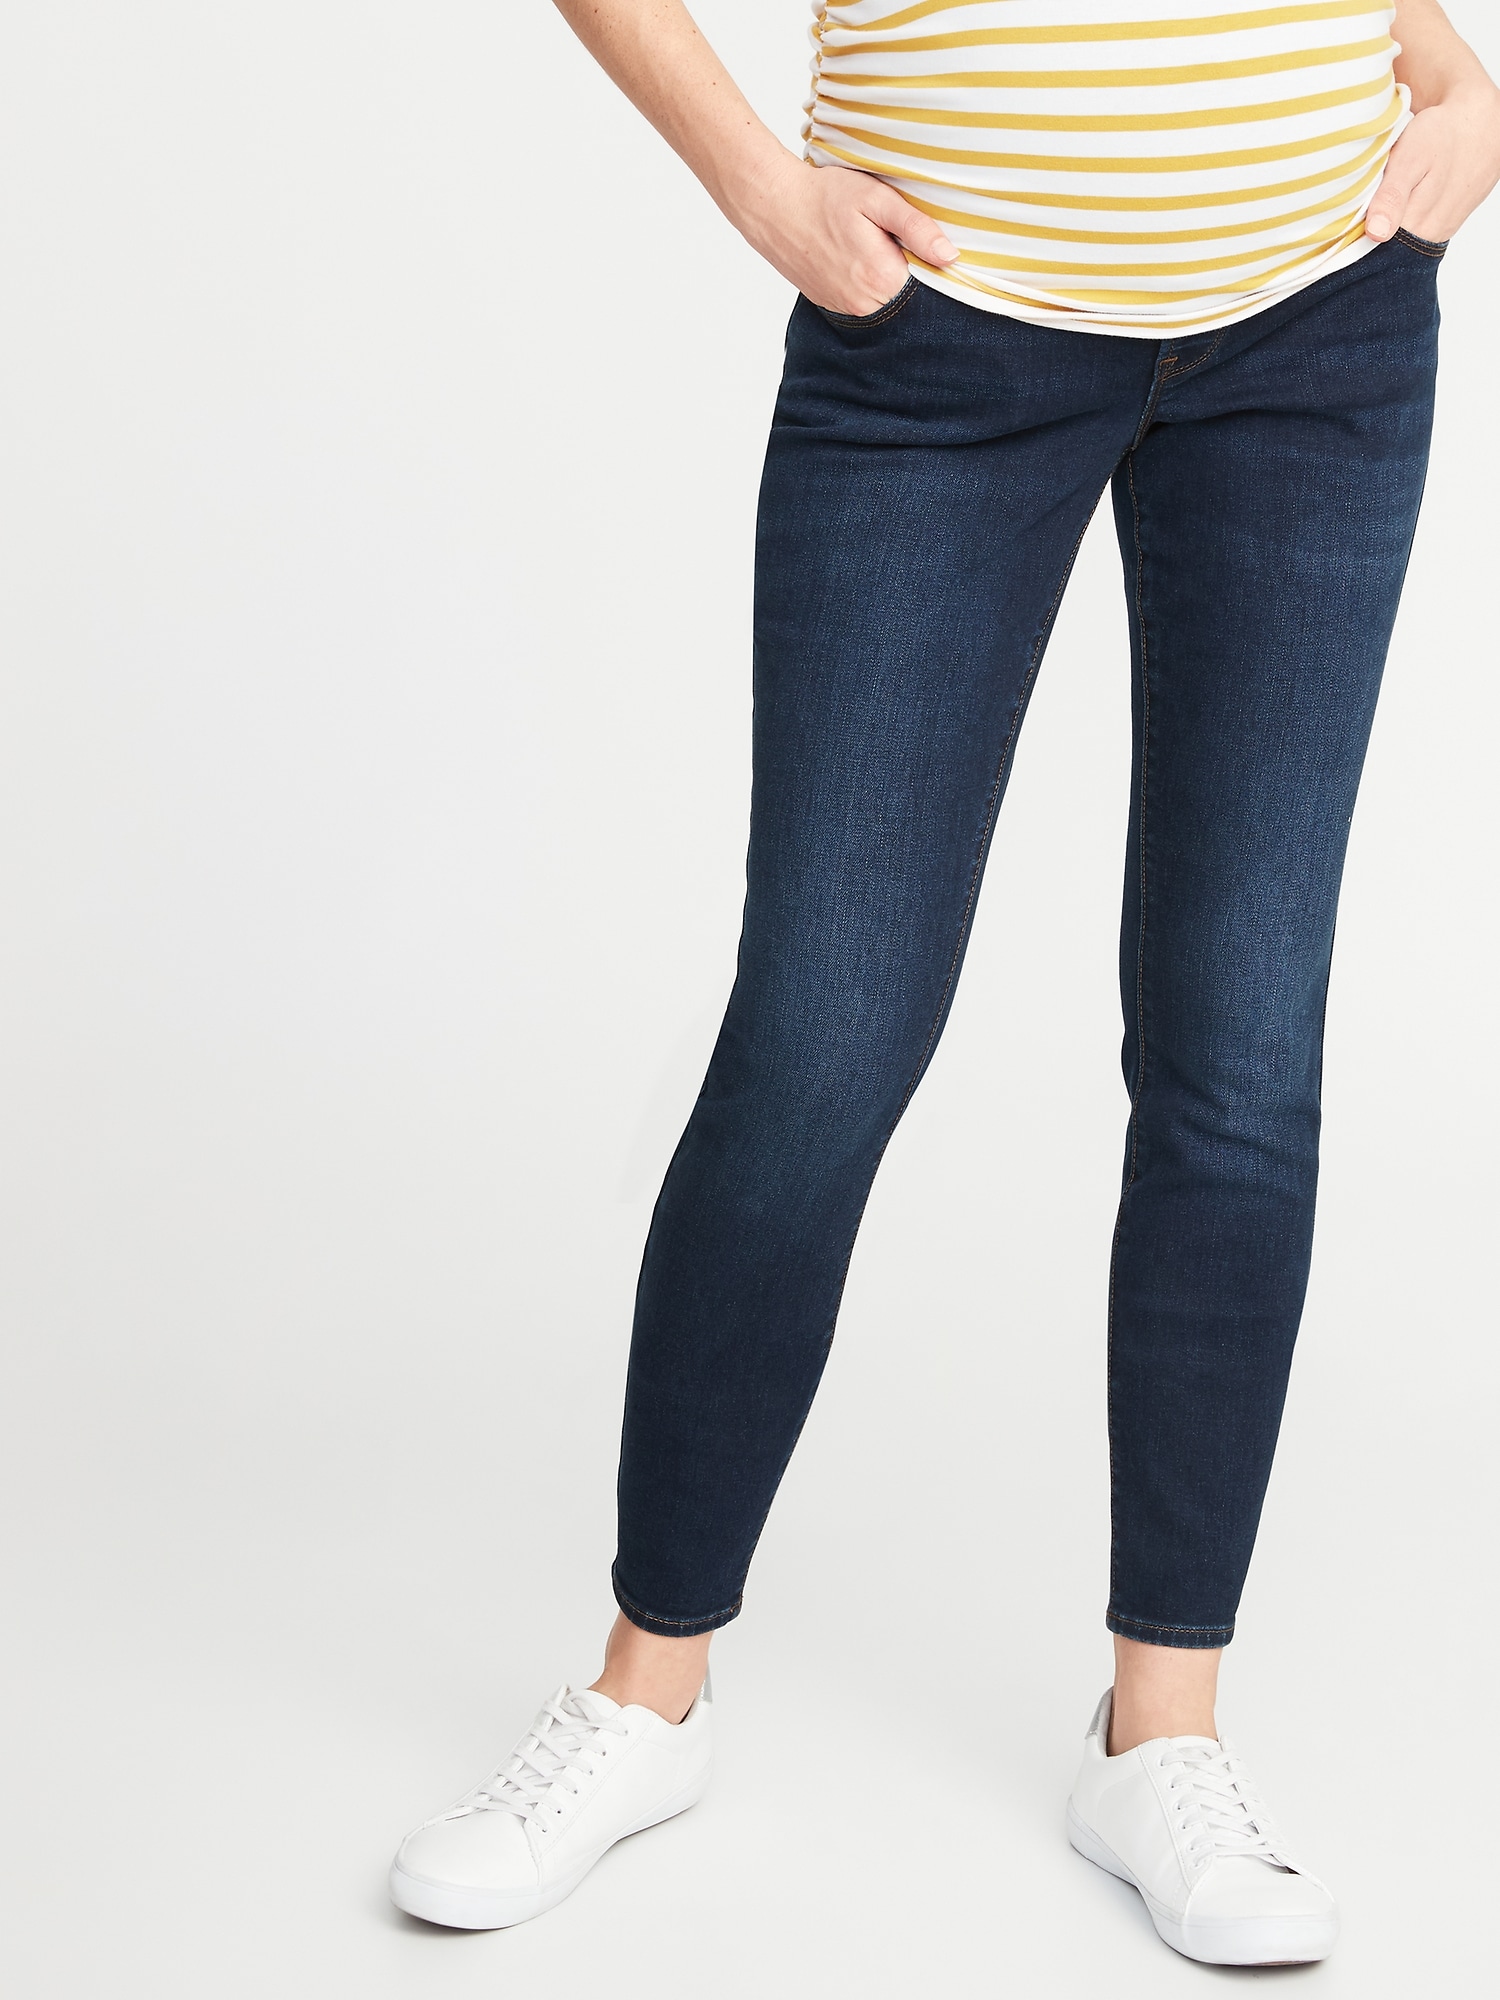 jeans in old navy